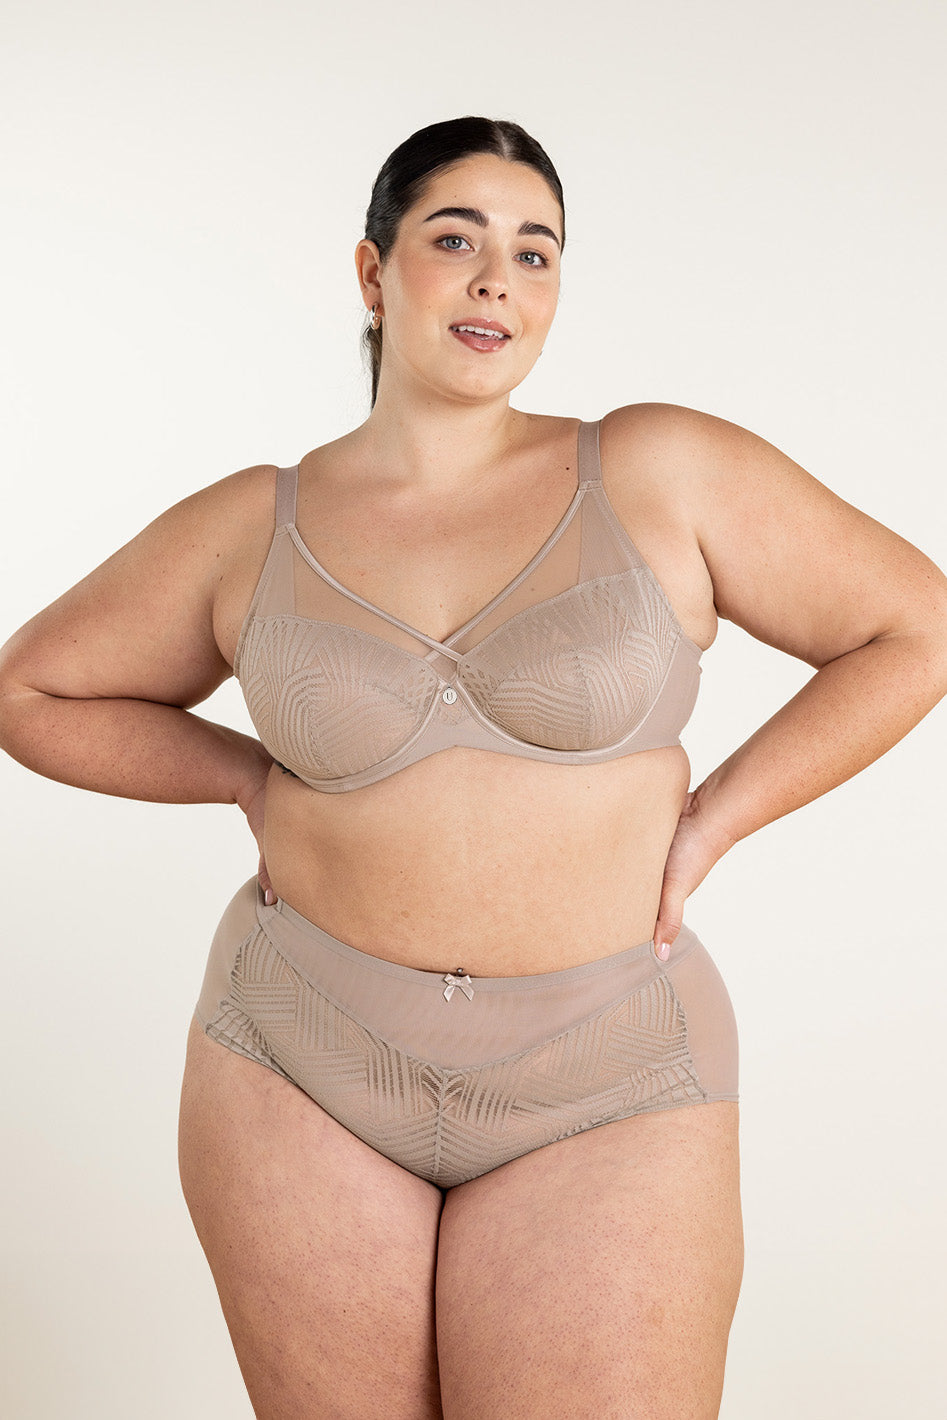 WOMAN WITHIN Plus-Size Women's Fashion & Lingerie CATALOG SPRING 2021 NEW  on eBid Canada